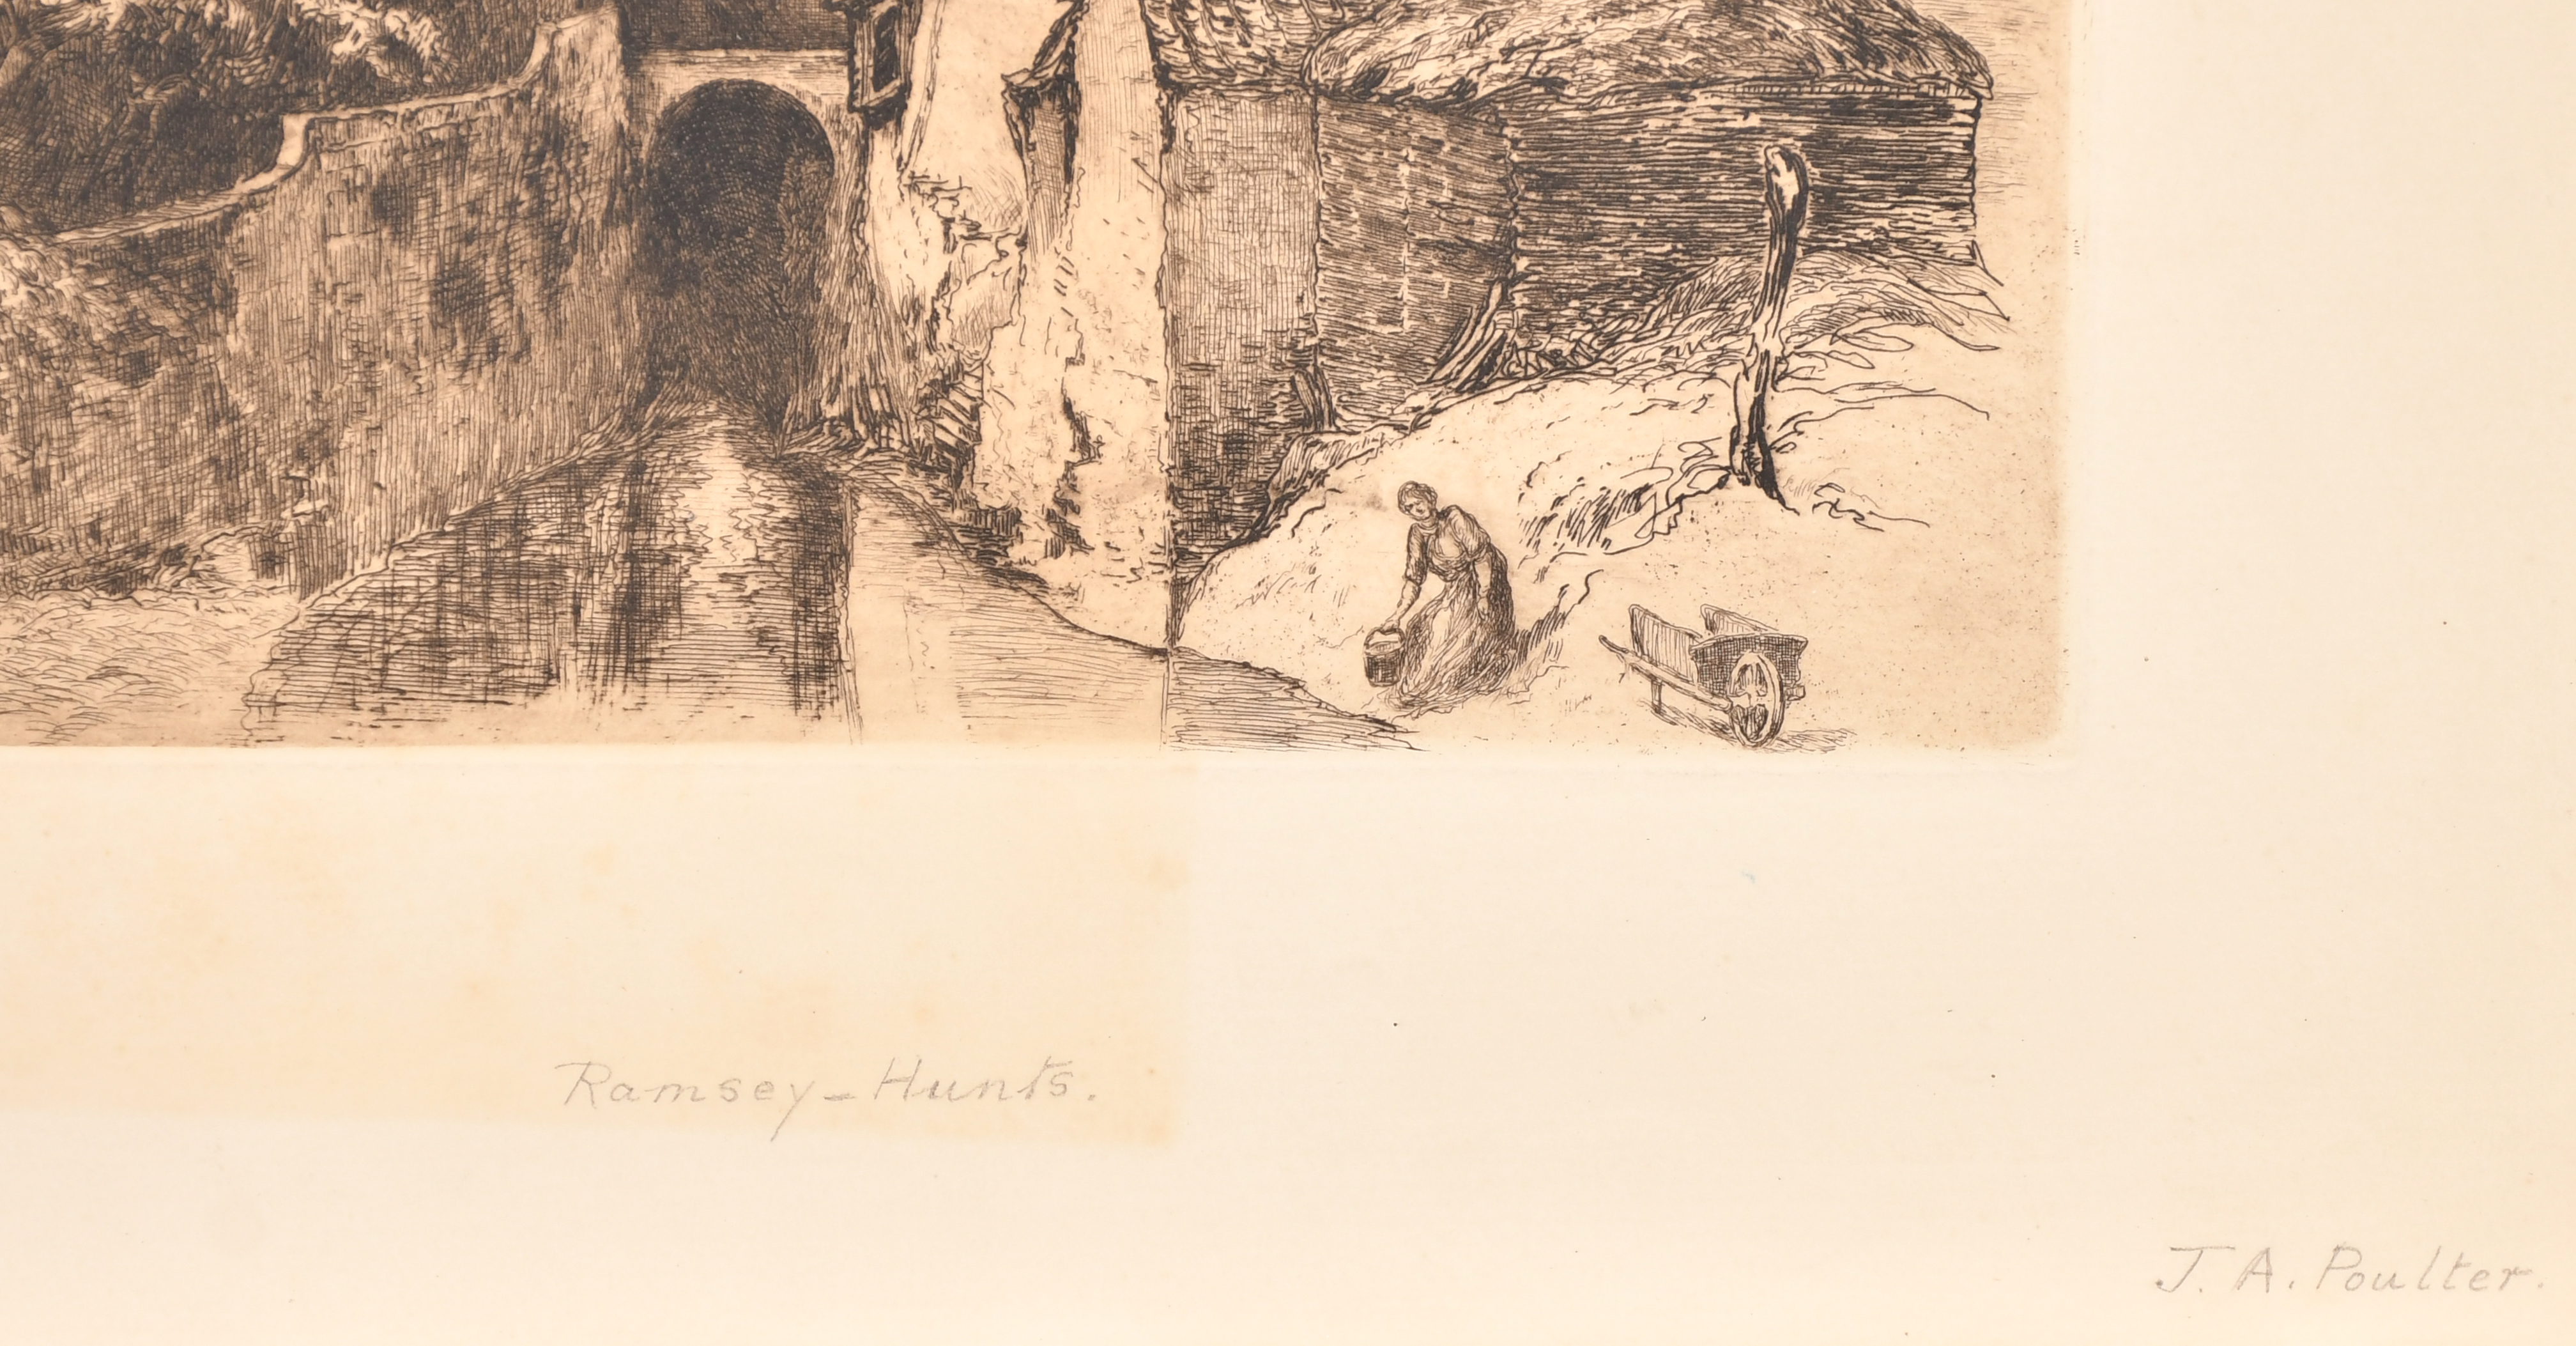 John Arthur Poulter (1825-1921) British. "Romsey-Hants", Etching, Inscribed in pencil, unframed 5. - Image 9 of 9